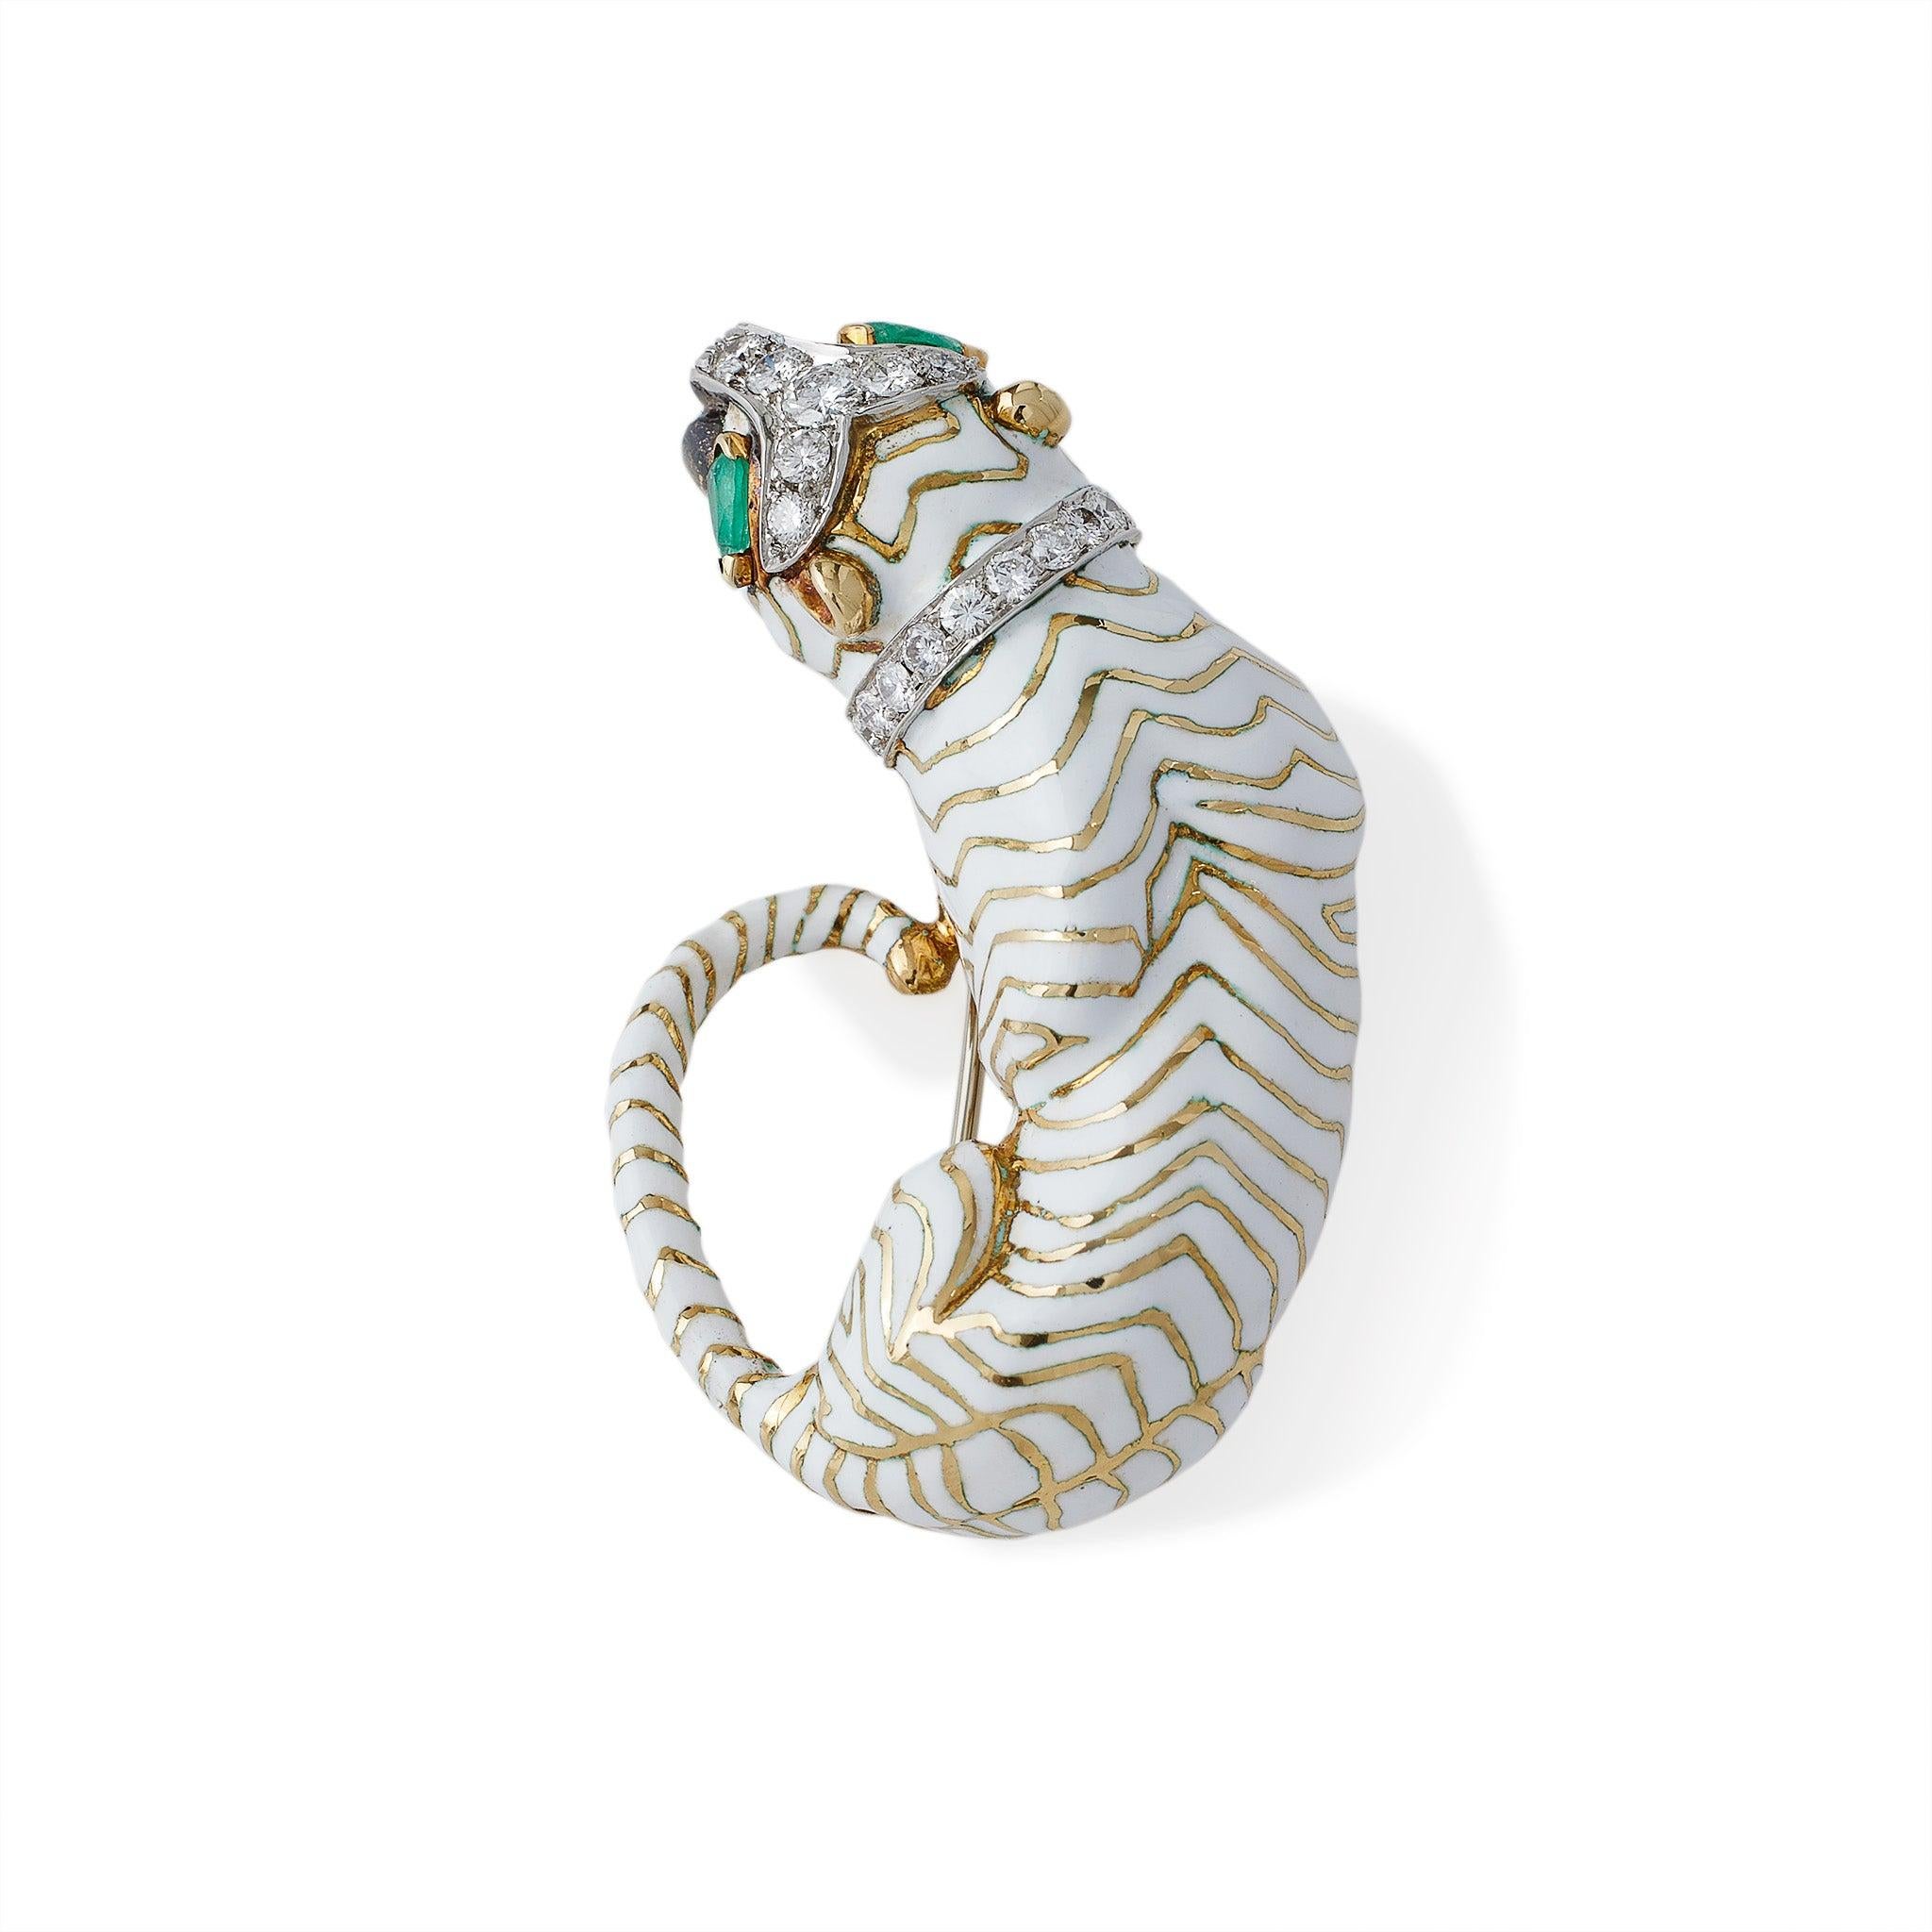 Designed by David Webb in 1965, this 18K gold and white enamel tiger brooch is set with diamonds and emeralds. The 18K gold tiger with white champlevé enamel stripes, pear-shaped cabochon emerald eyes, and round brilliant-cut diamond streak and